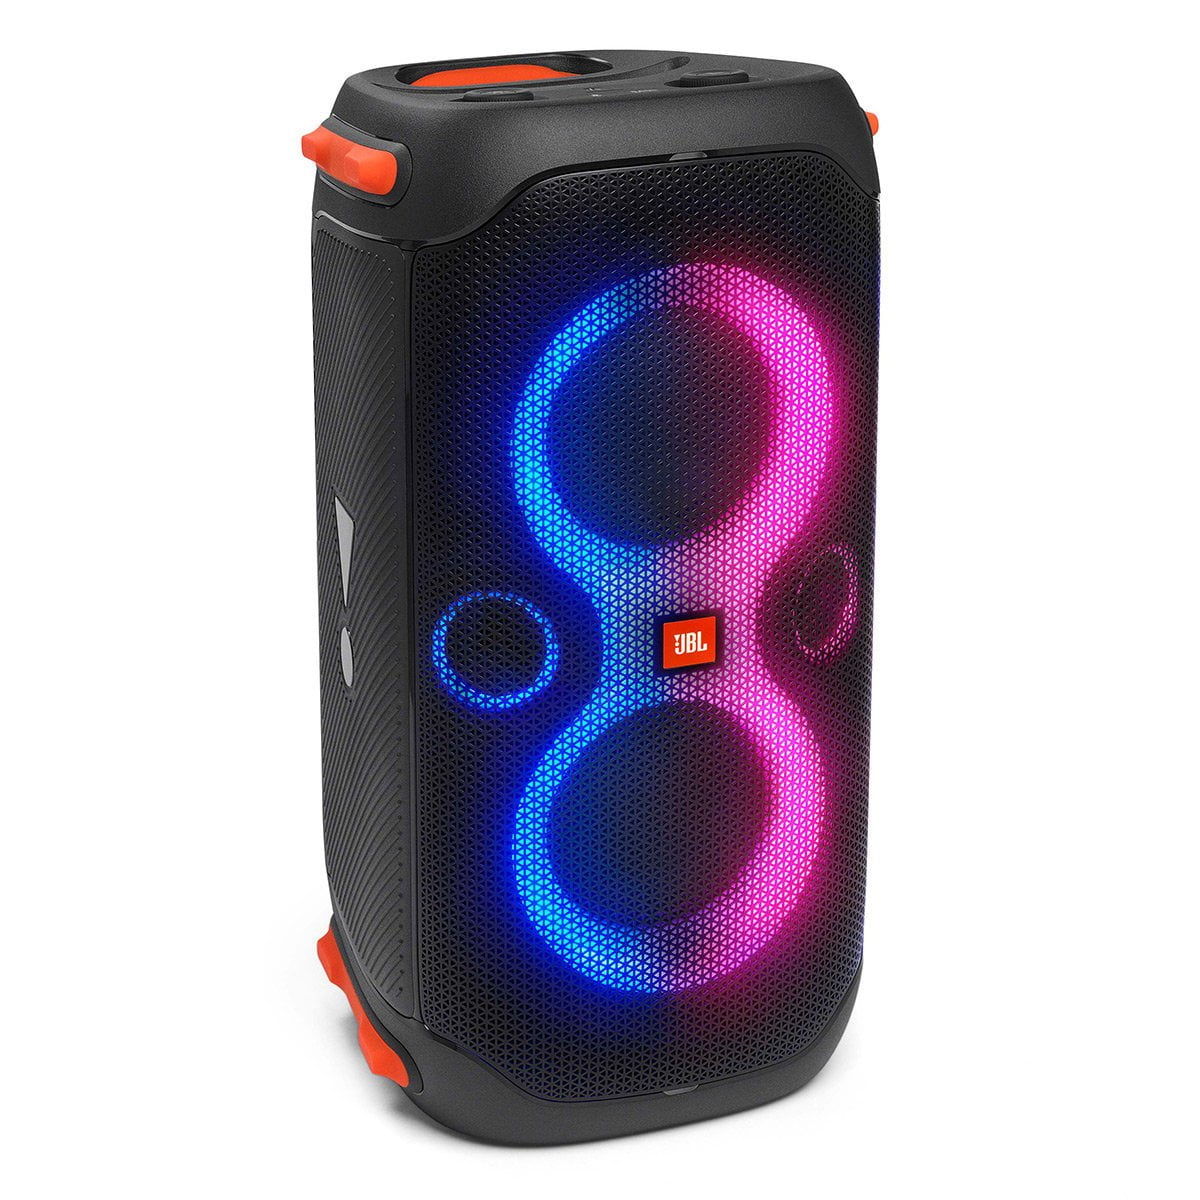 JBL PARTYBOX 110 Powerful portable Bluetooth party speaker with light show Walmart.com